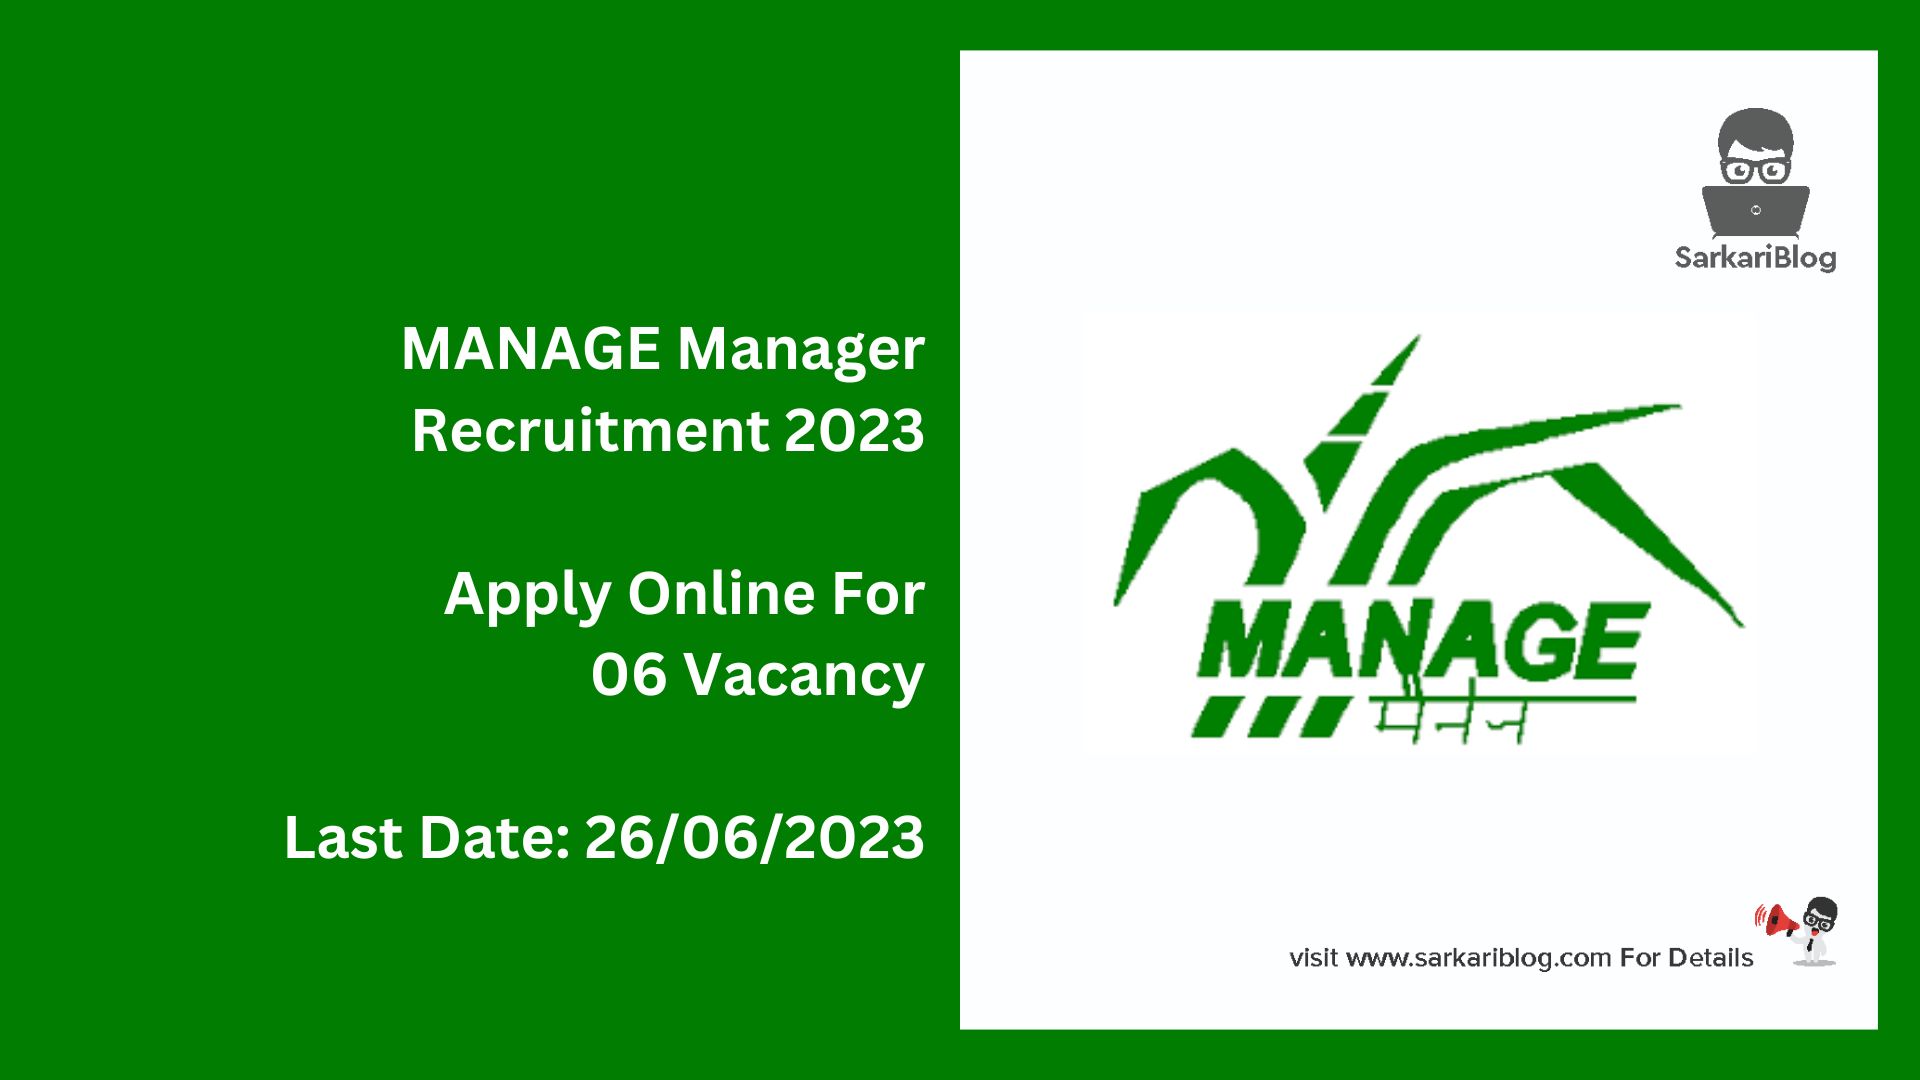 MANAGE Manager Recruitment 2023